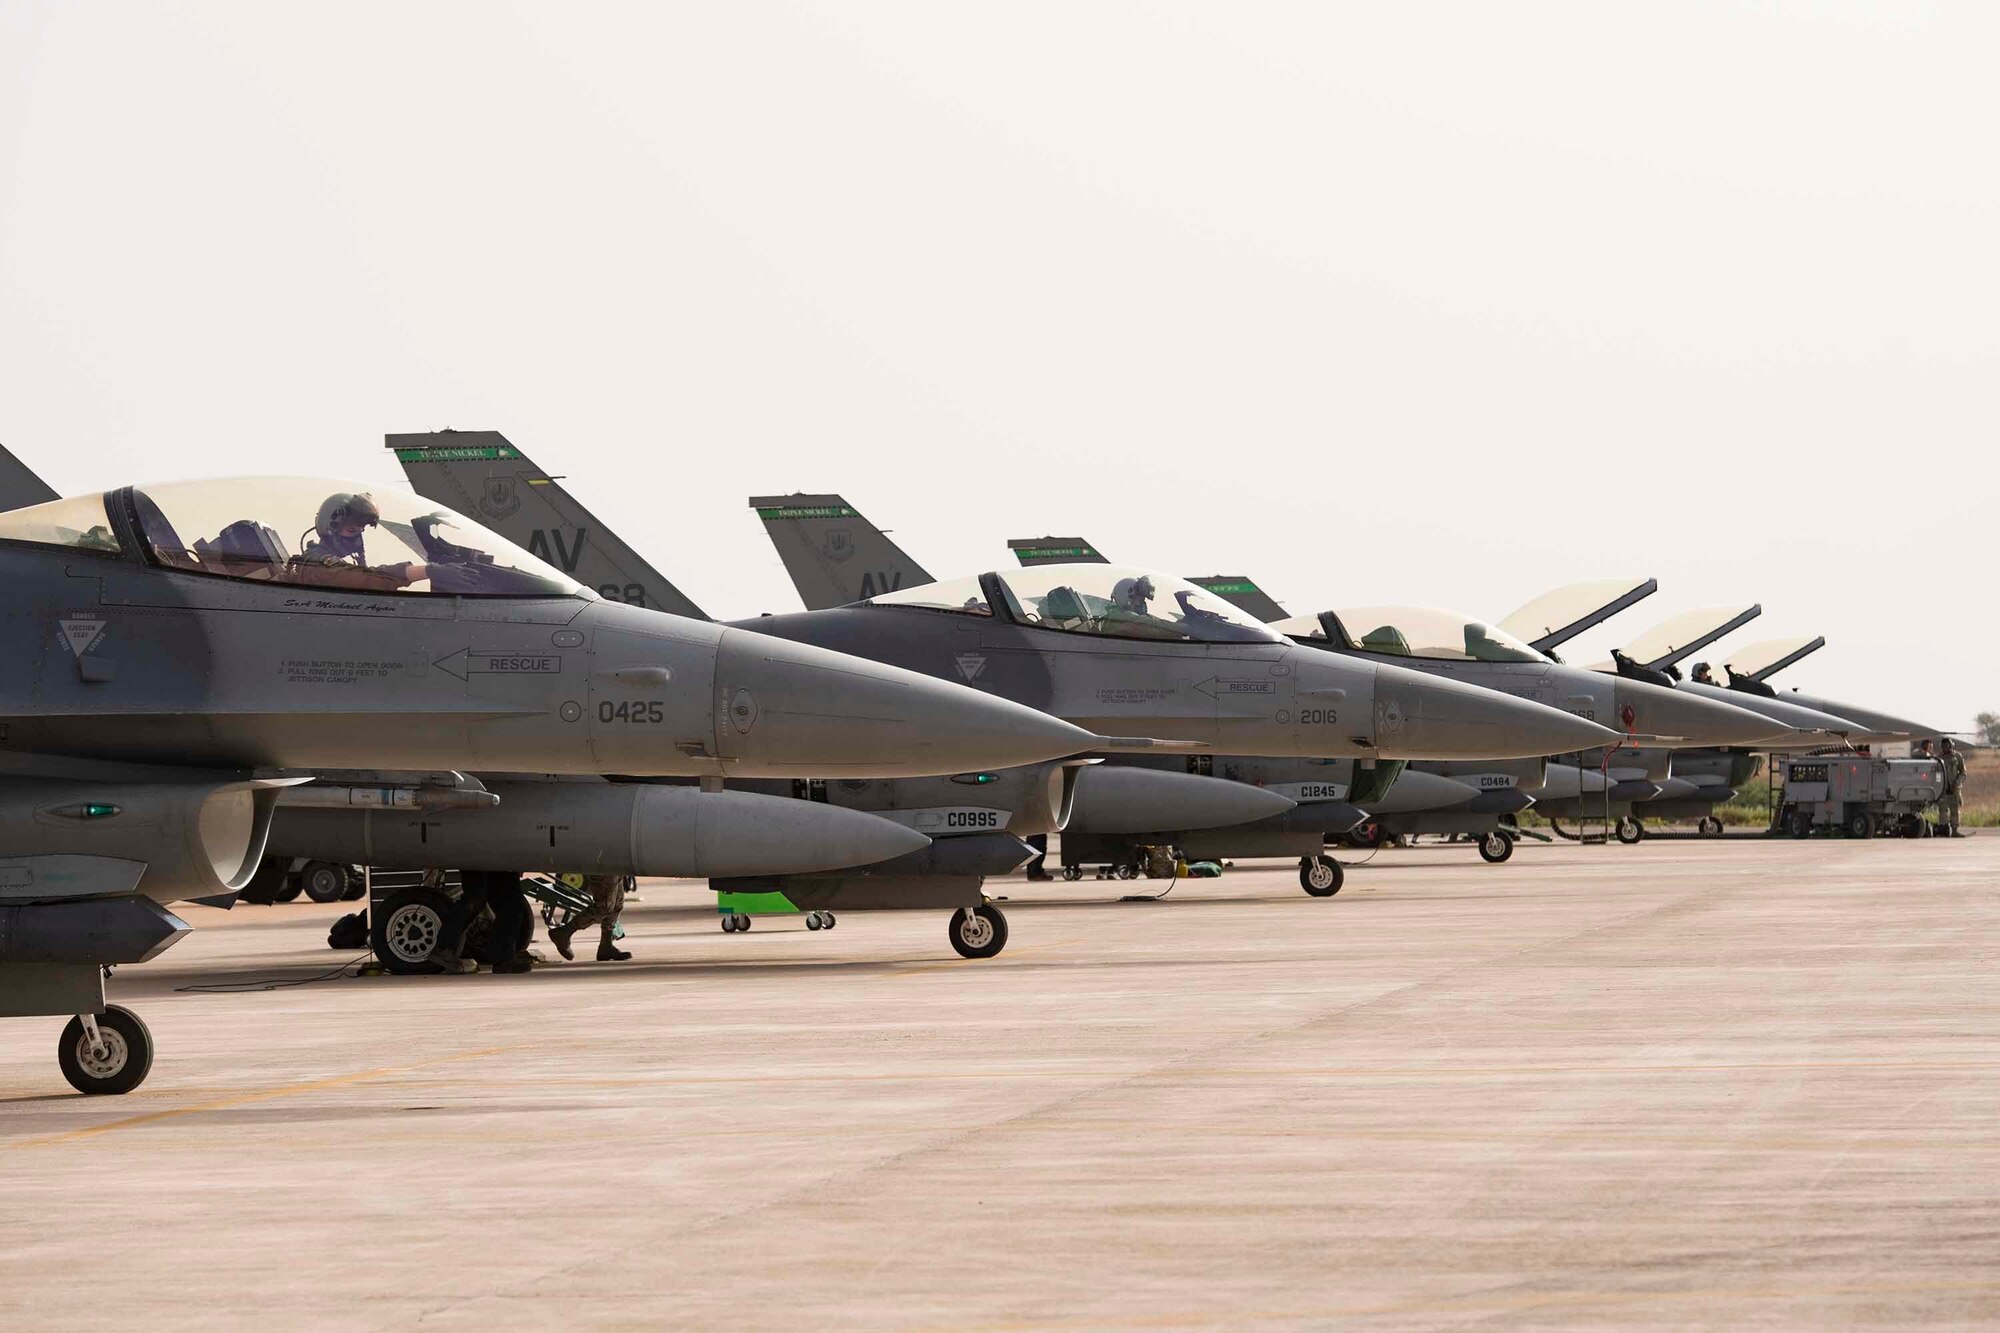 F-16C Fighting Falcons from the 555th Expeditionary Fighter Squadron rest on the flight line during exercise African Lion 2019 at Ben Guerir Air Base, Morocco.